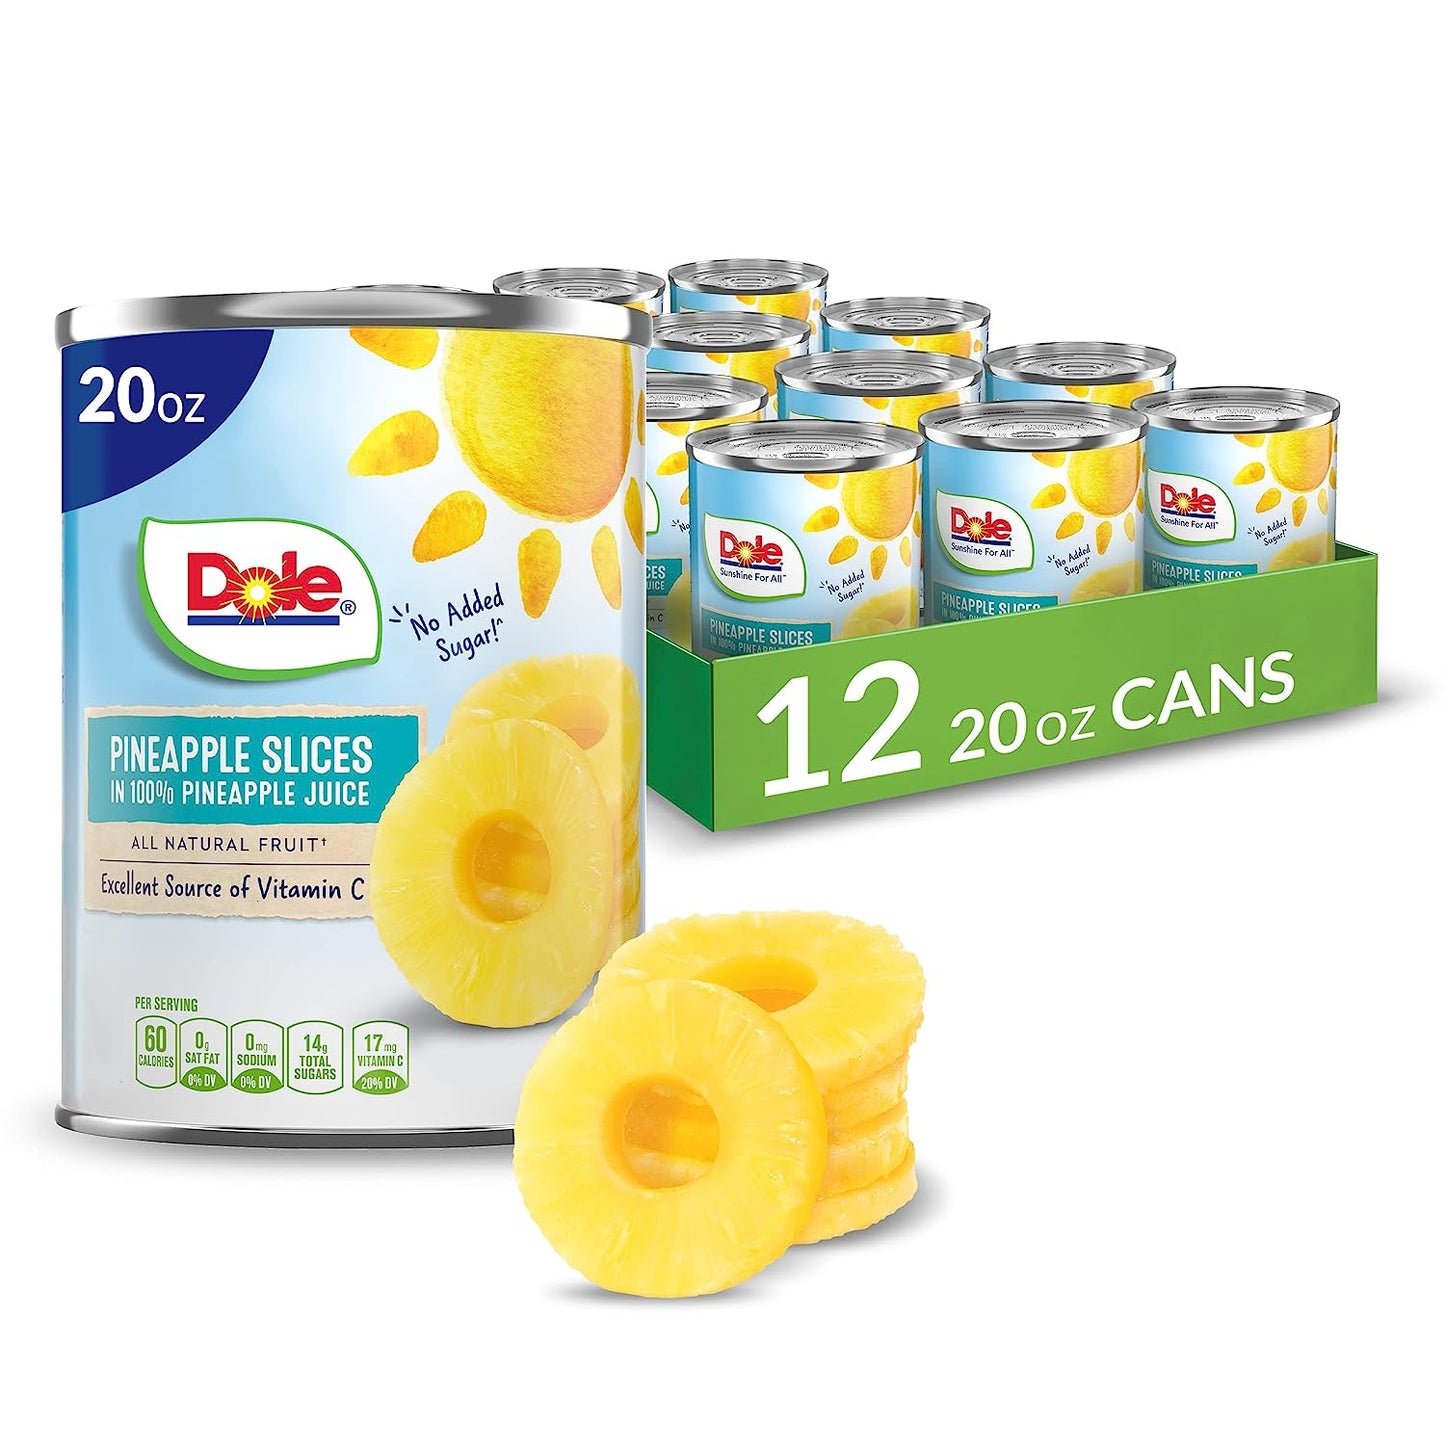 Dole Canned Fruit, Pineapple Slices in 100% Pineapple Juice*, Gluten Free, Pantry Staples, 20 Oz, 12 Count